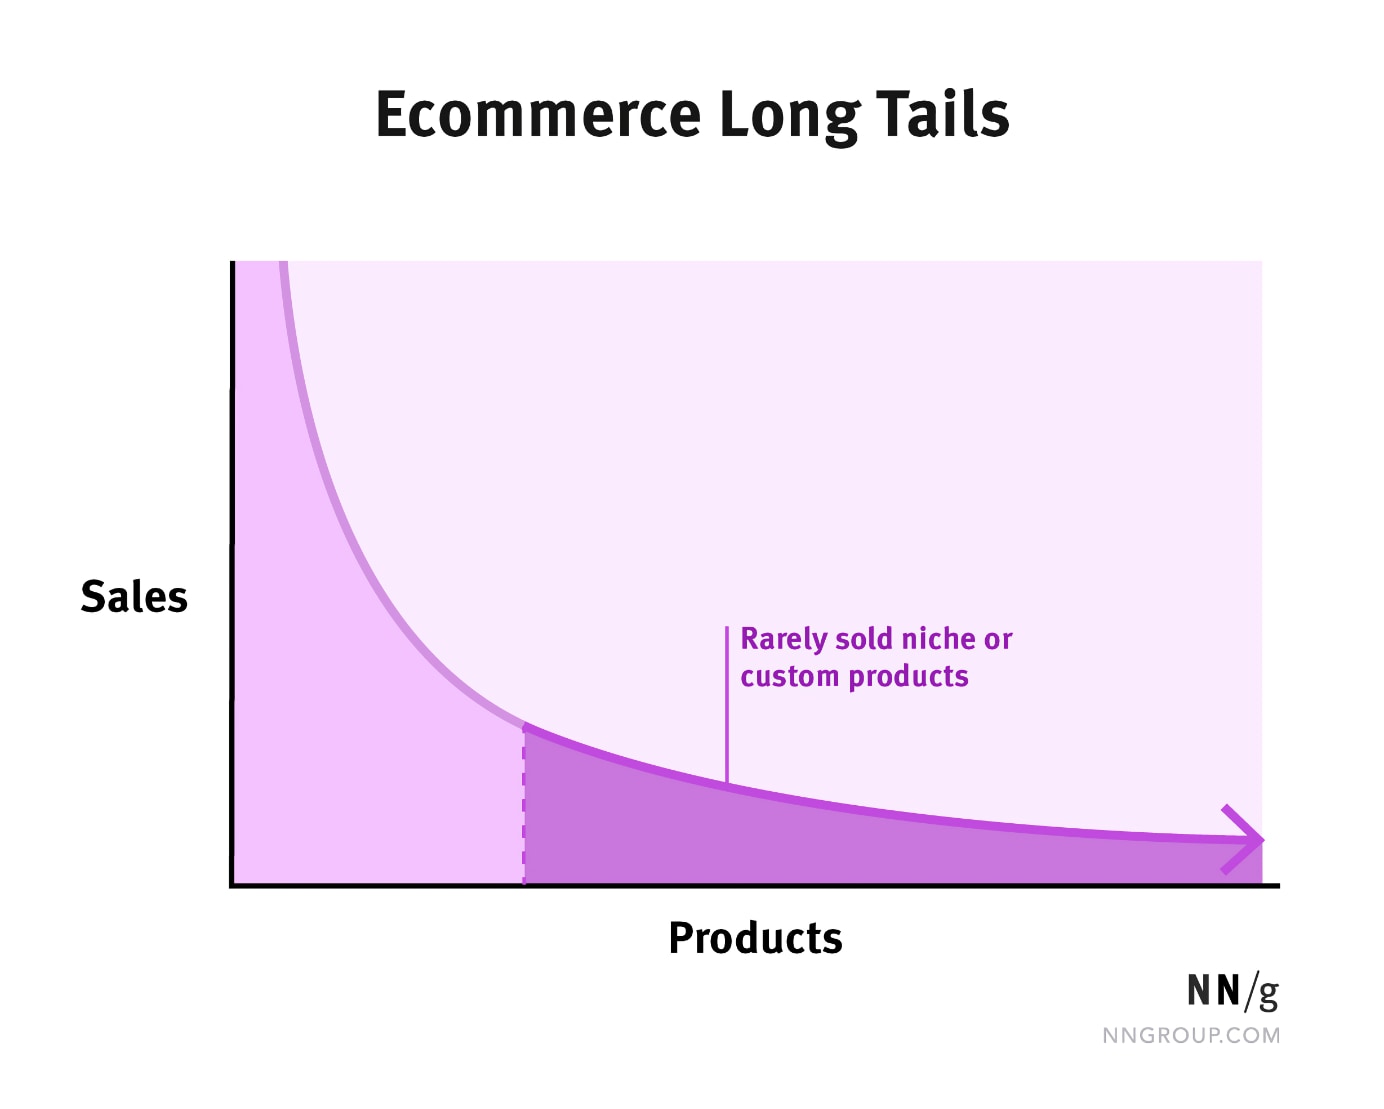 A sharply sloped distribution curve where the X-axis is products and the Y-axis is sales. The area under the curve's tail is shaded and annotated with "Rarely sold niche or custom products".